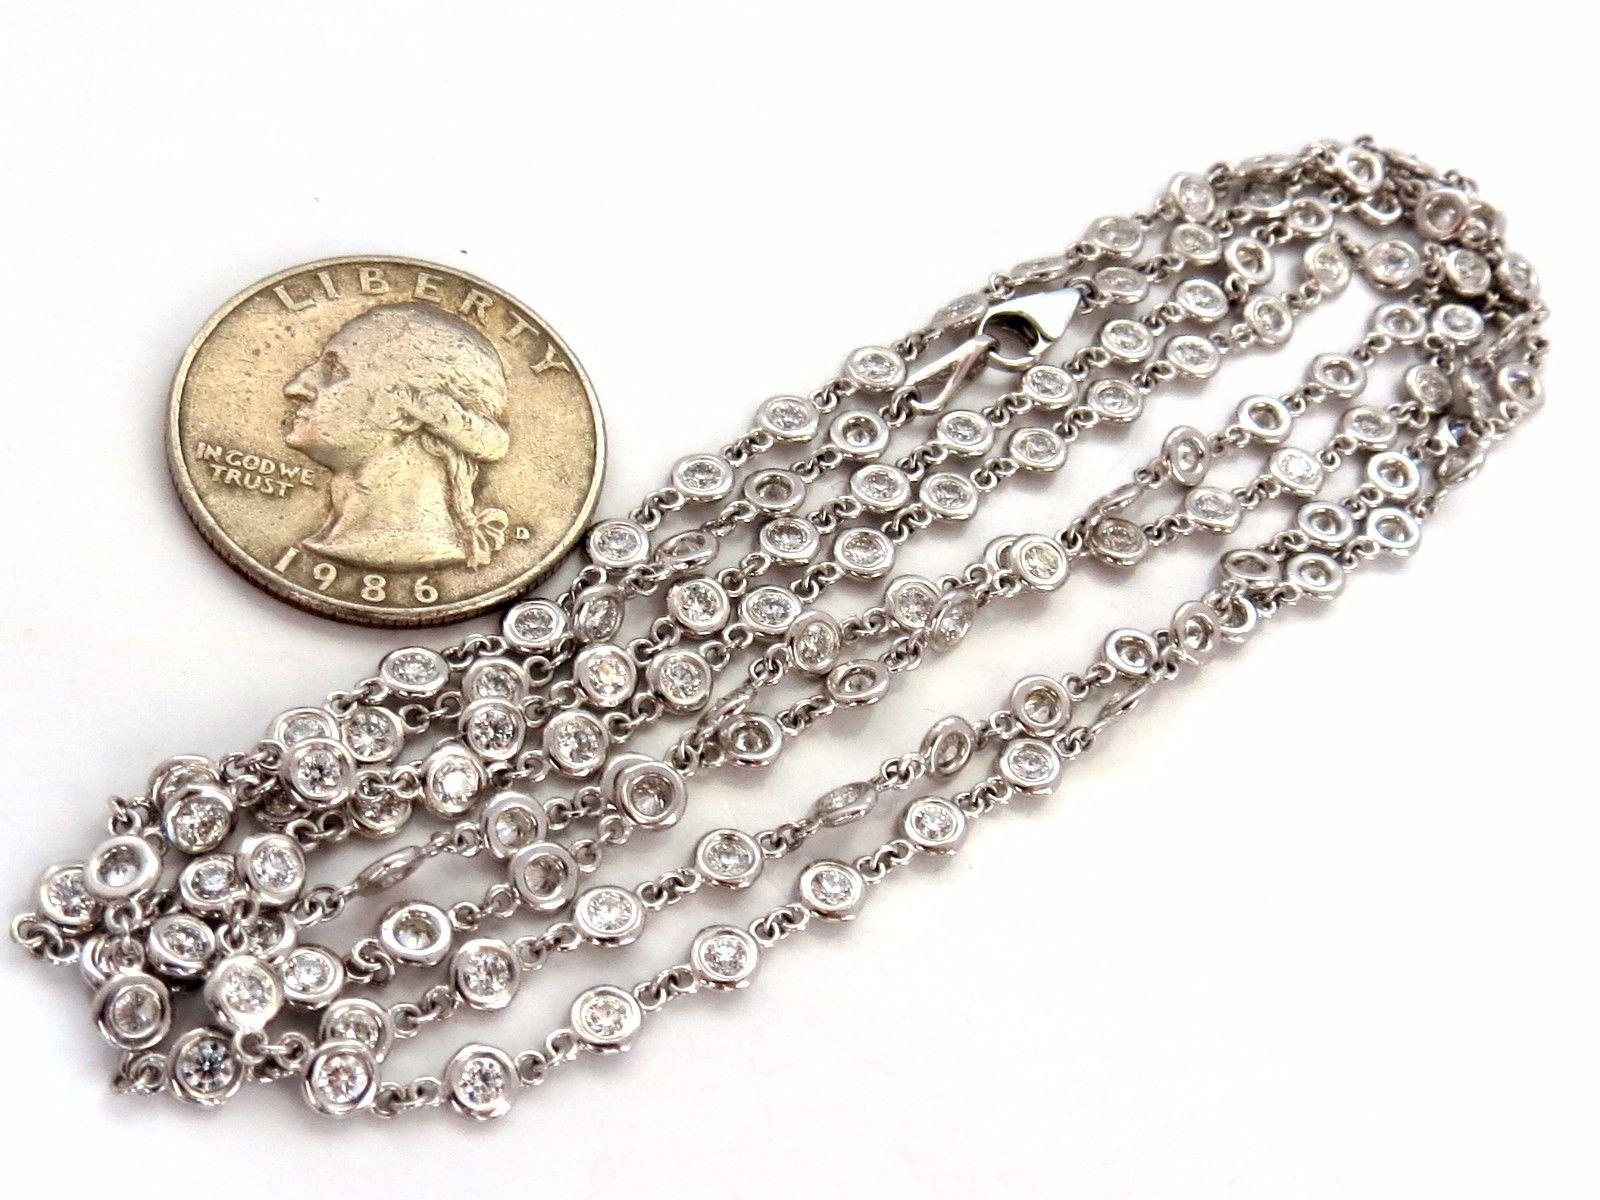 5.55ct. Diamonds Station By Yard Necklace.
Double Wrap Version.


Natural Rounds, Full cuts.
F/G colors

Vs-2 clarity.


124 diamonds total count.

Total Necklace Length: 35.5 Inch.

14Kt White gold 

15 Grams

Diamonds mounted flush / smooth